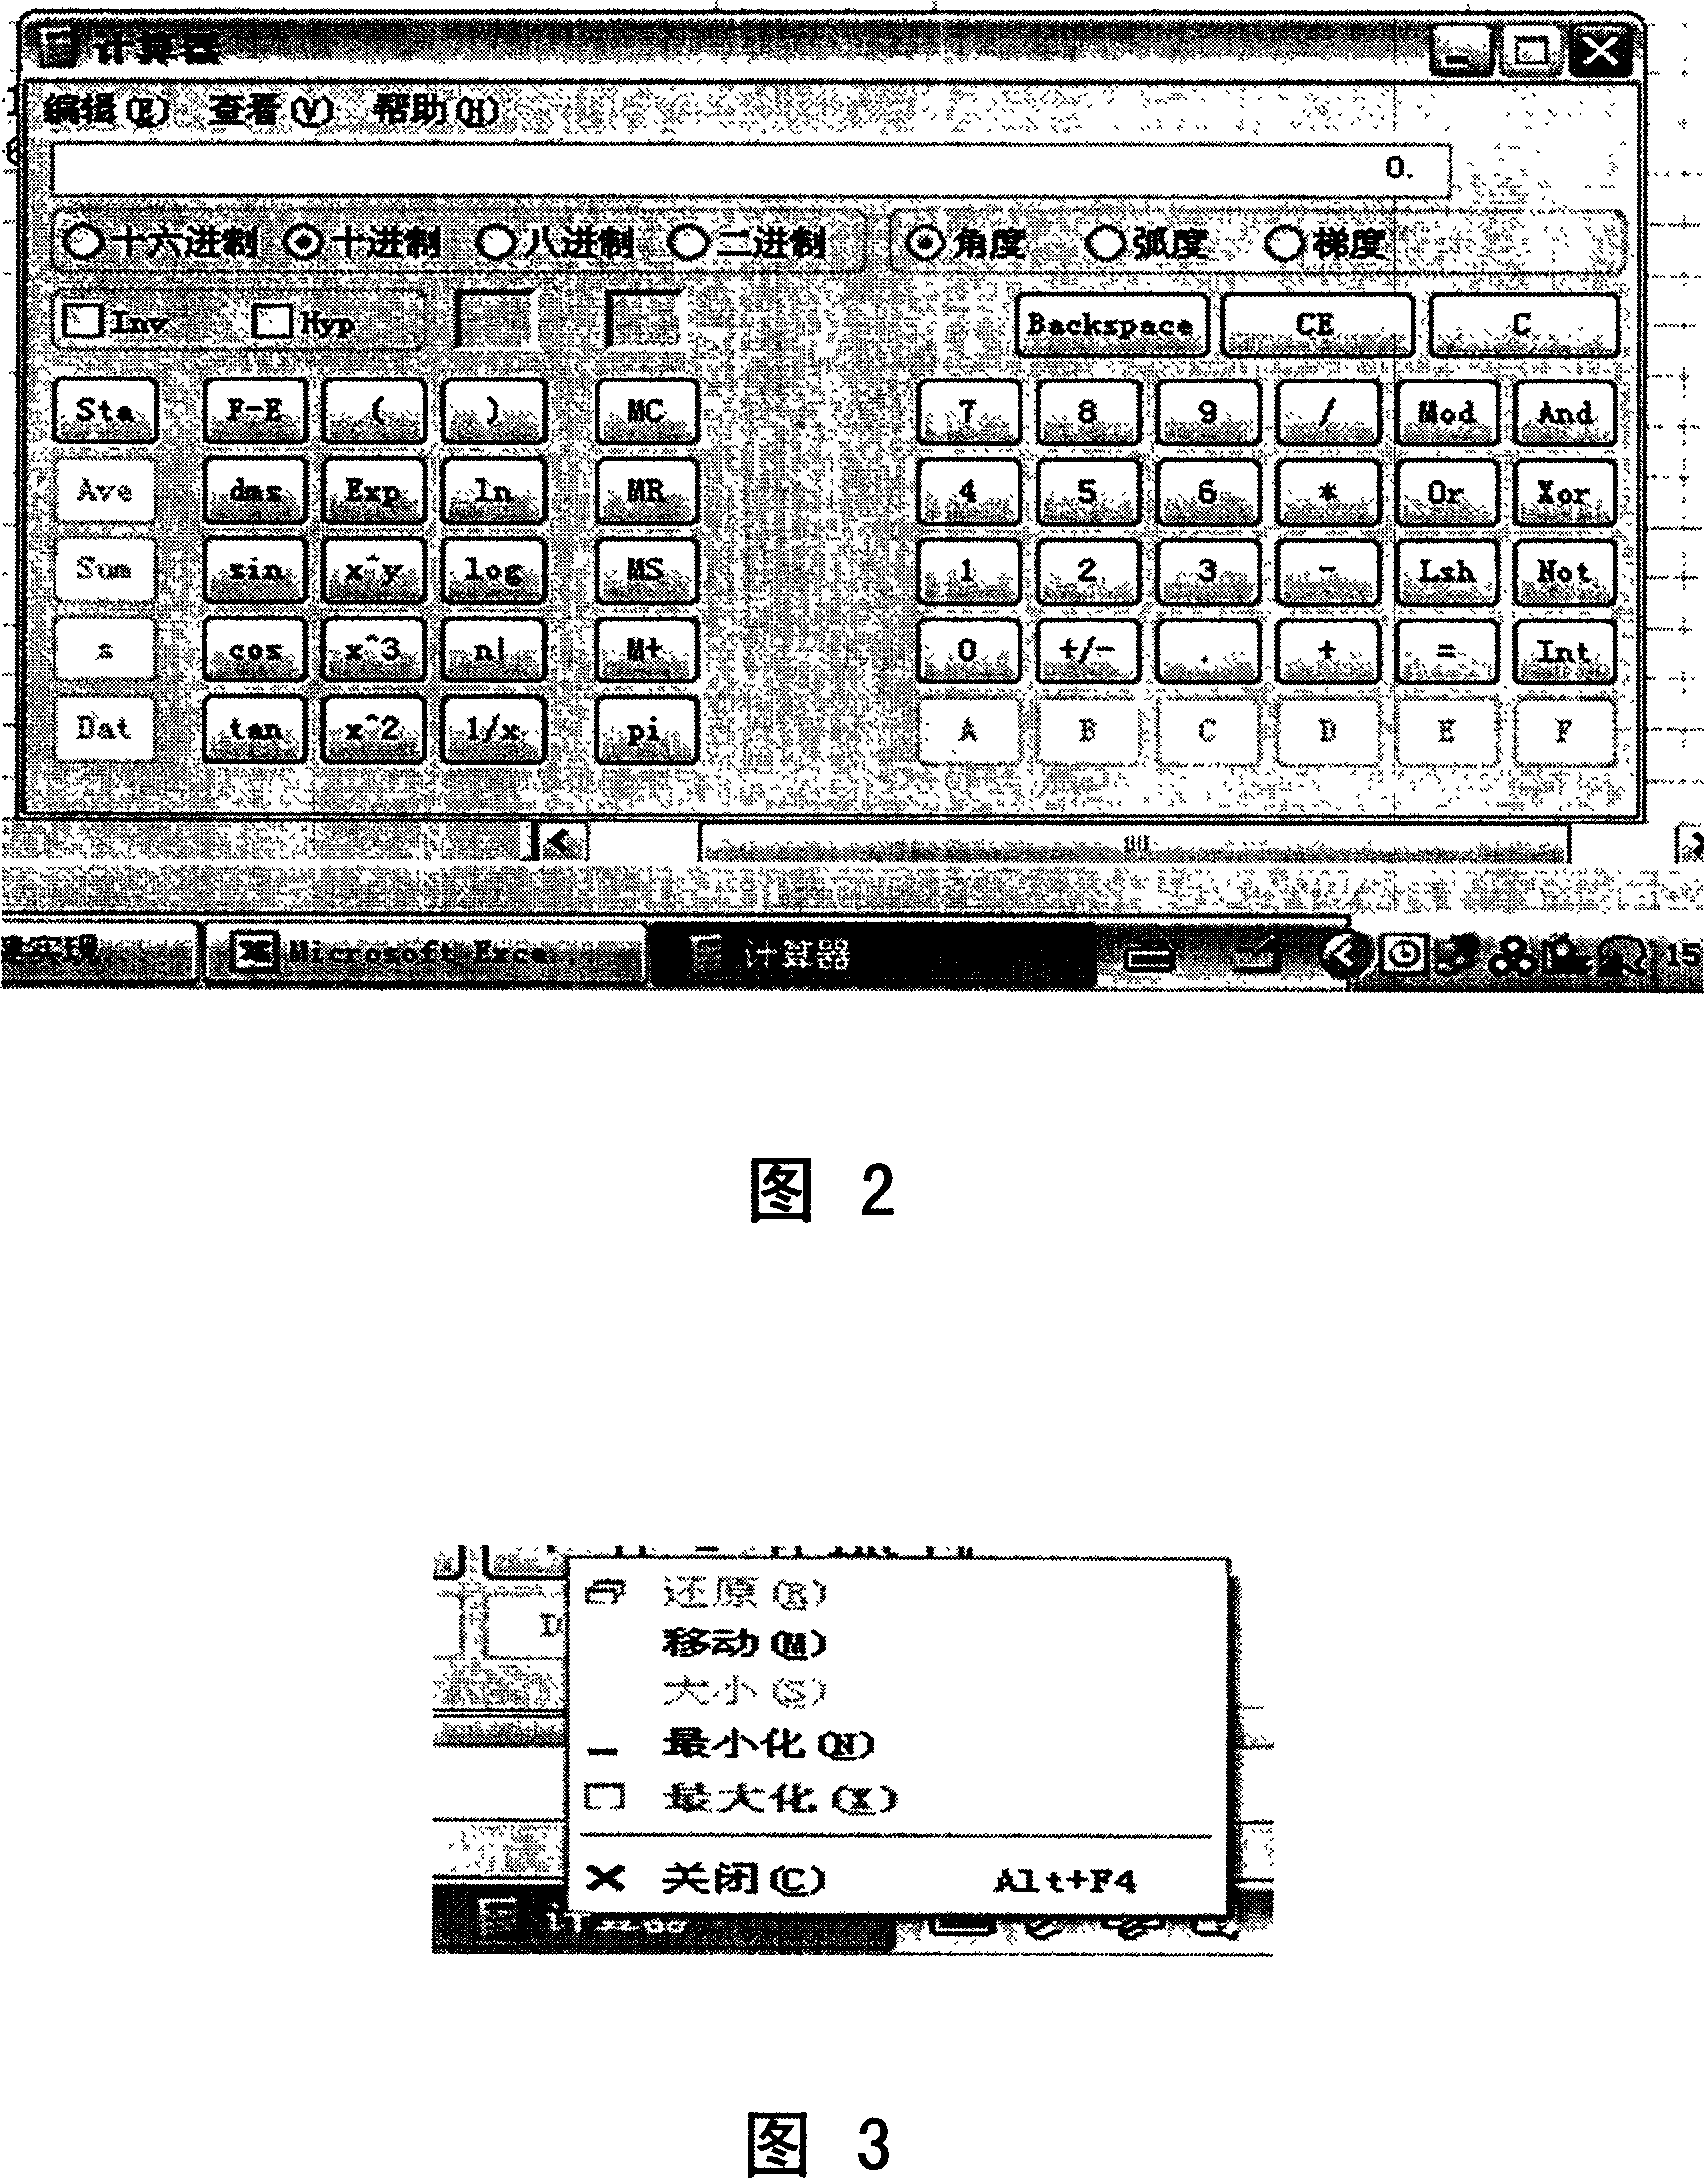 Method for realizing shortcut on-off application